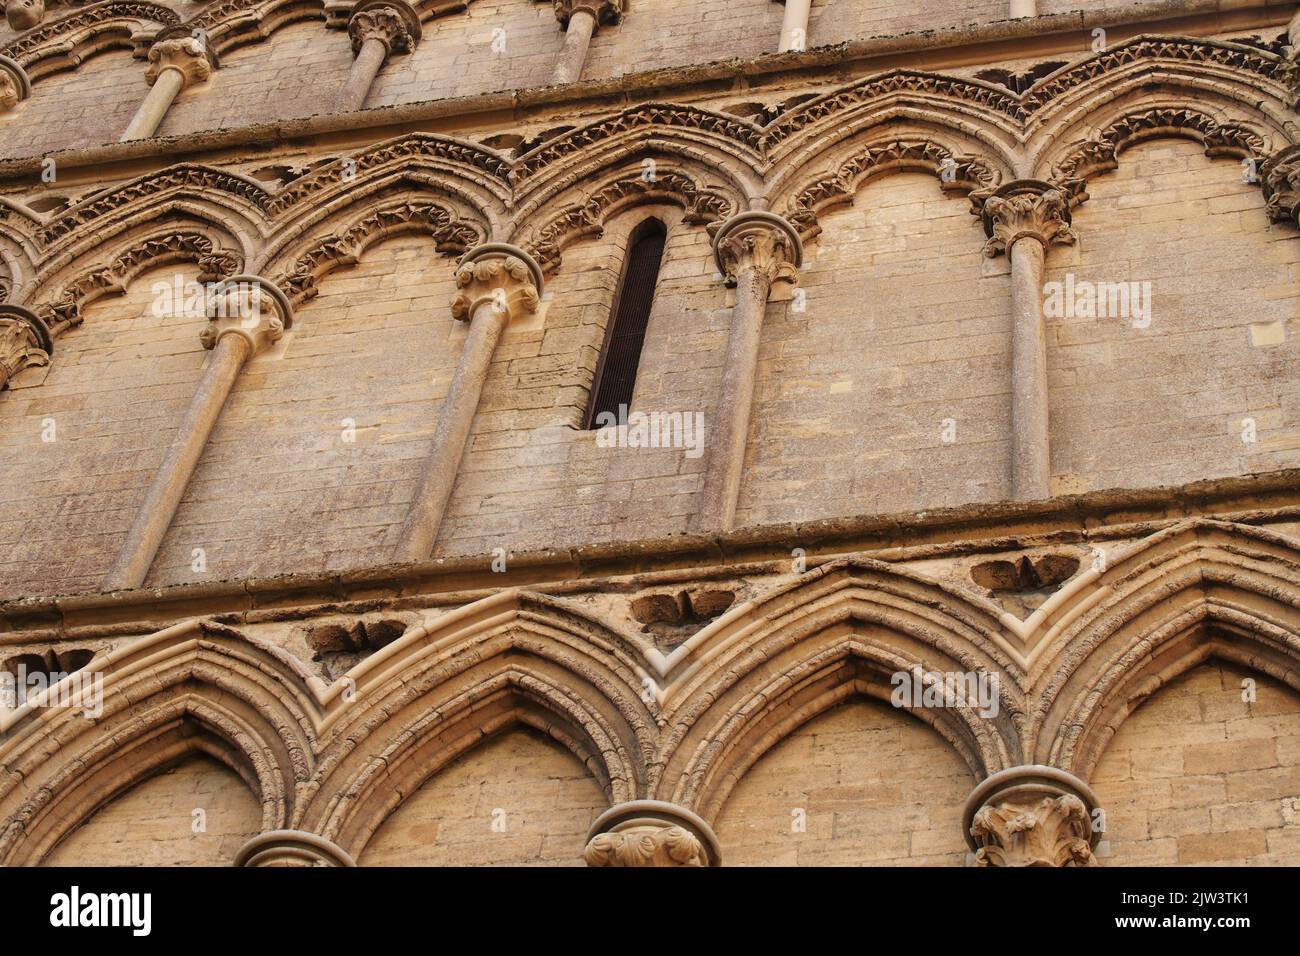 A view of parts of the detailed masonry carvings of Ely cathedral, Cambridgeshire showing the skill and intricate stone carvings in the walls Stock Photo